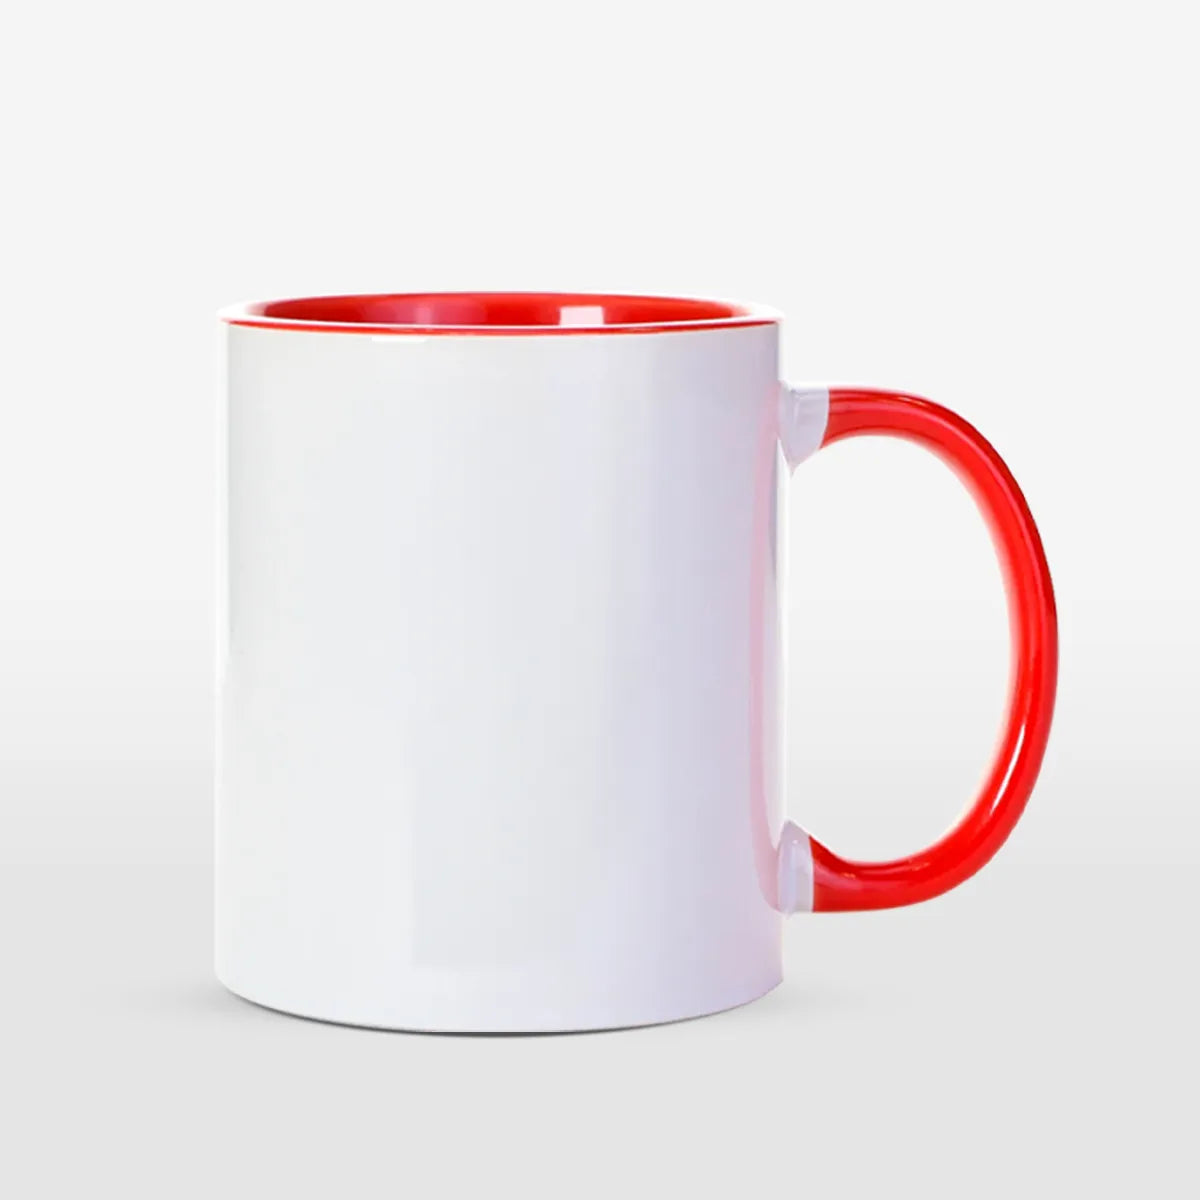 11oz. Dye Sublimation Inner Colored Coated Mugs - Case of 36 - Red